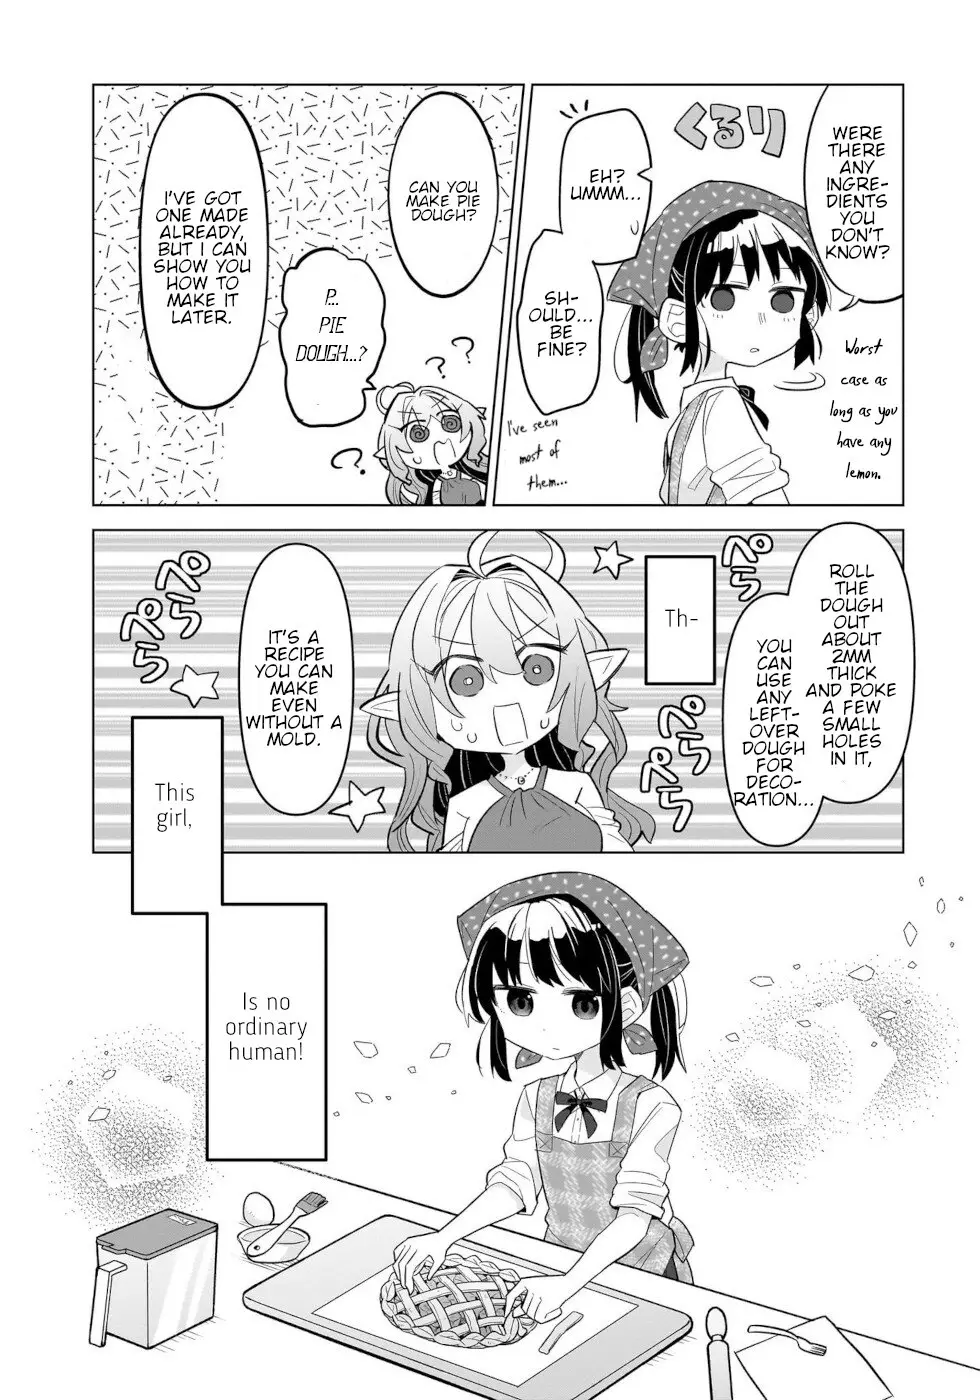 Sweets, Elf, And A High School Girl - 1 page 21-02016137